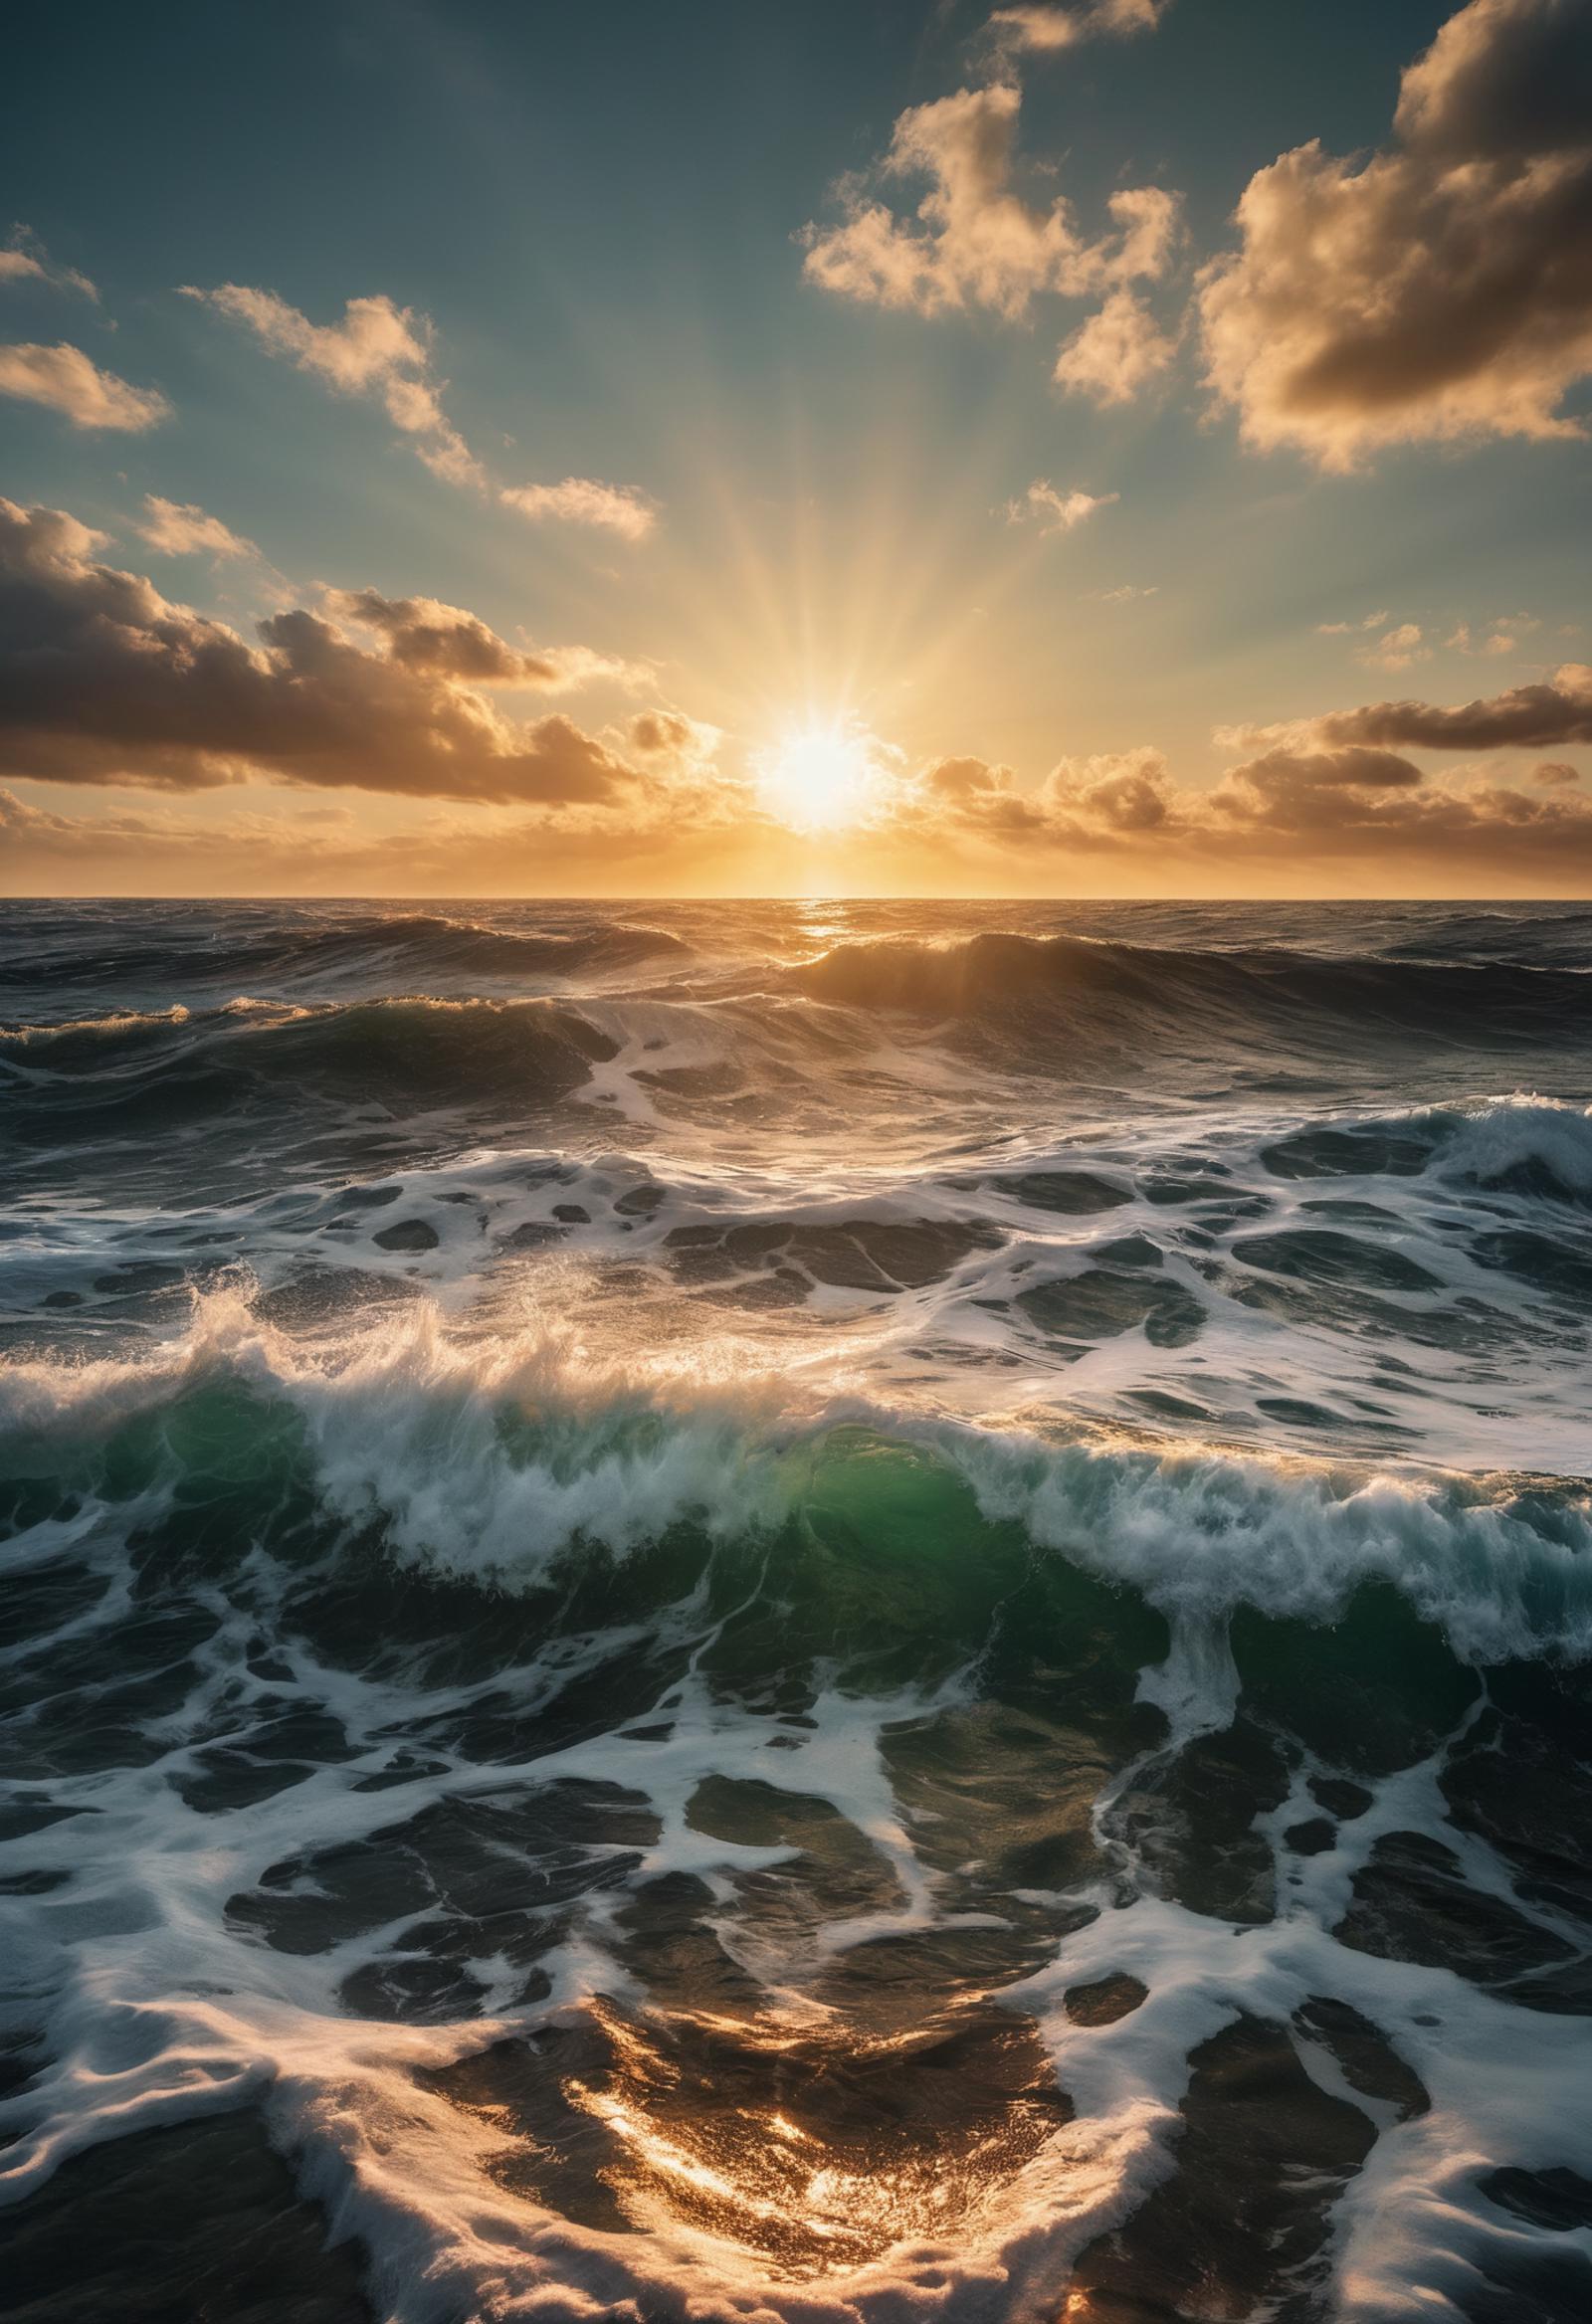 Sunset over the ocean with waves crashing.